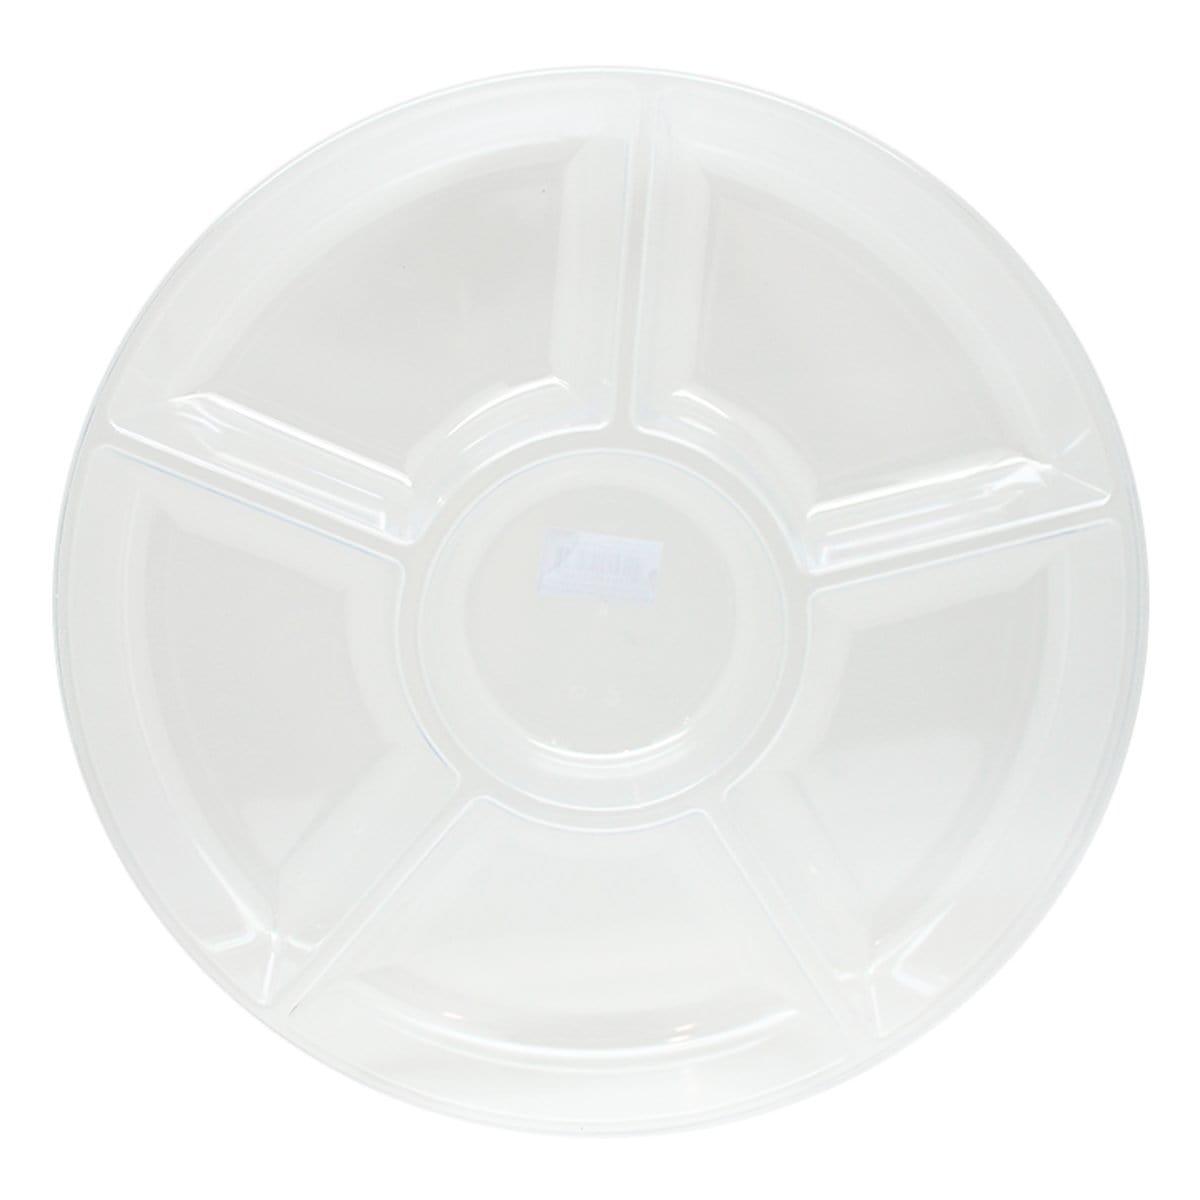 Buy Plasticware Round Lazy Suzan - 12 In sold at Party Expert